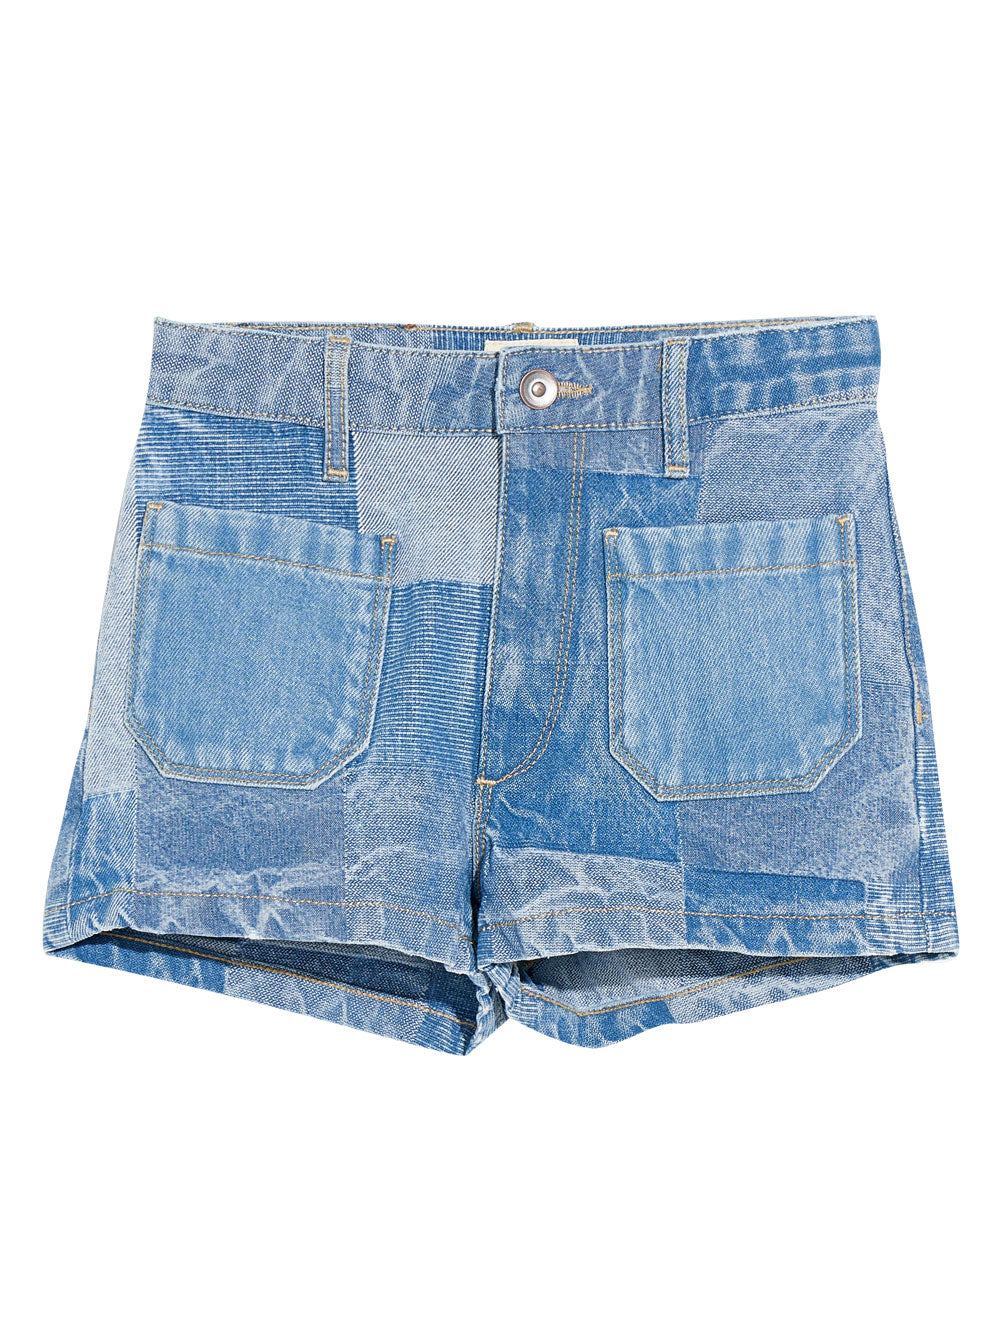 PREORDER: Peppy Shorts